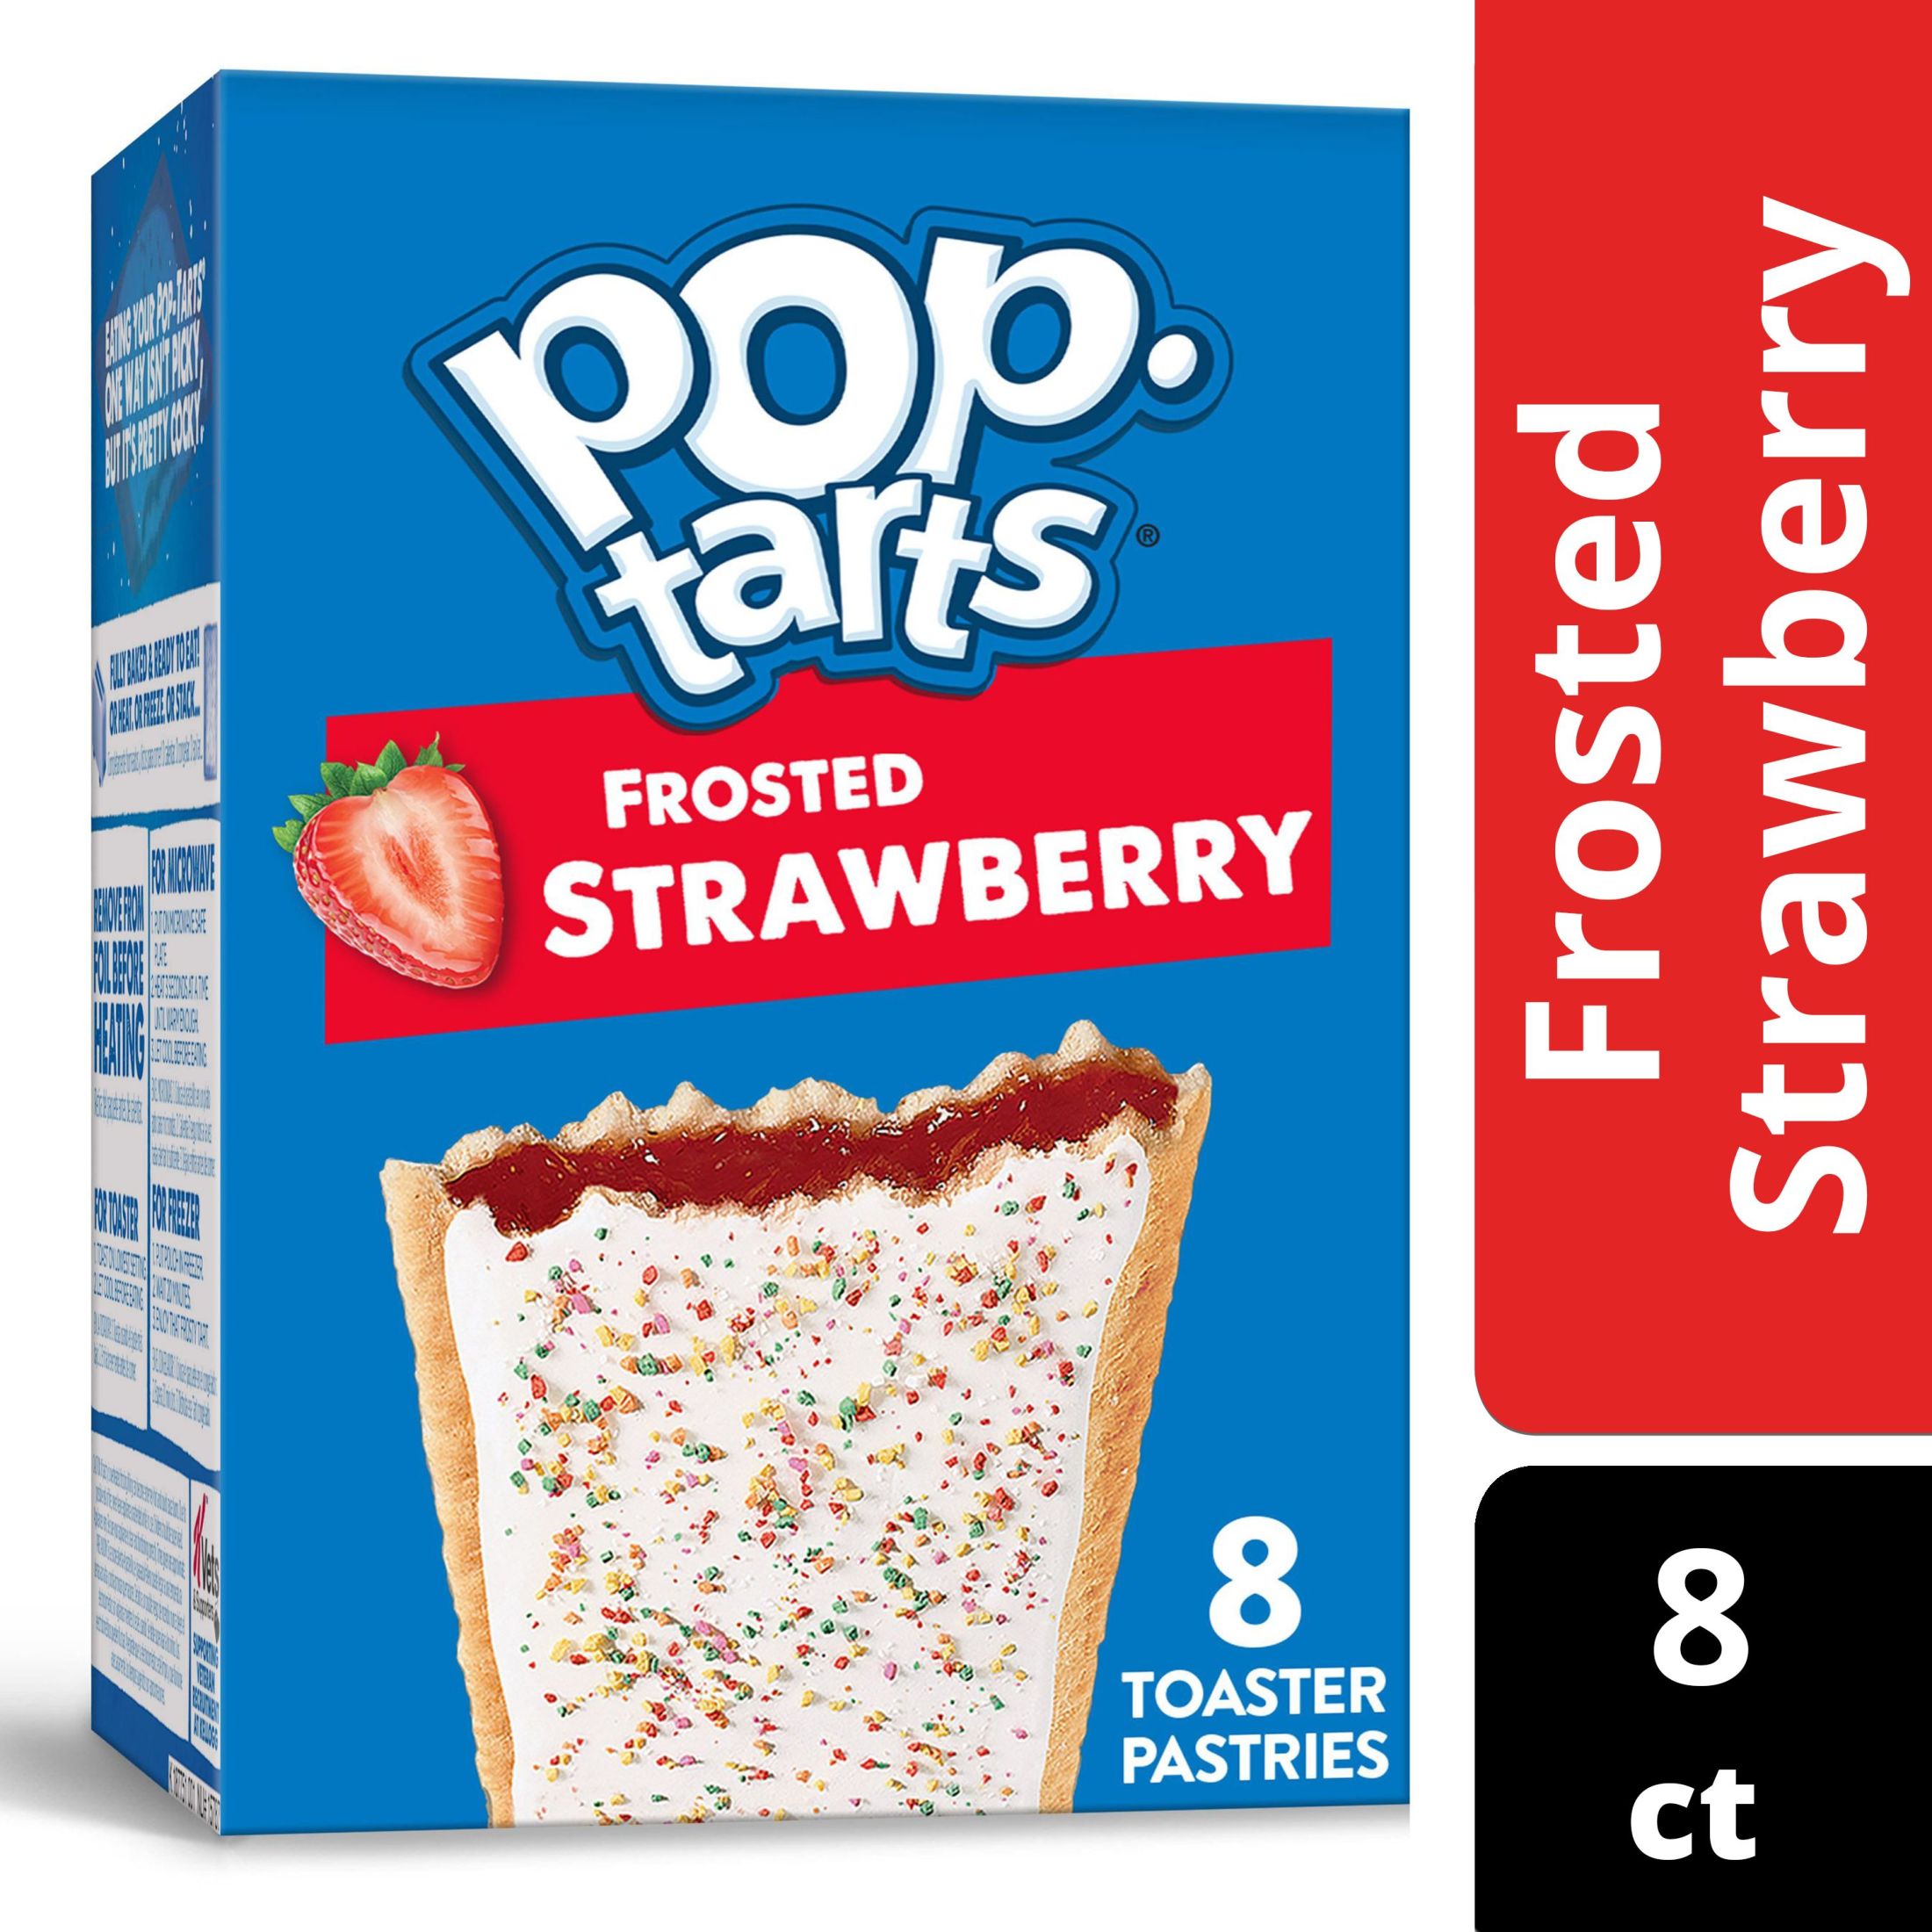 Pop-Tarts Frosted Strawberry Instant Breakfast Toaster Pastries, Shelf-Stable, Ready-to-Eat, 13.5 oz, 8 Count Box - image 1 of 15